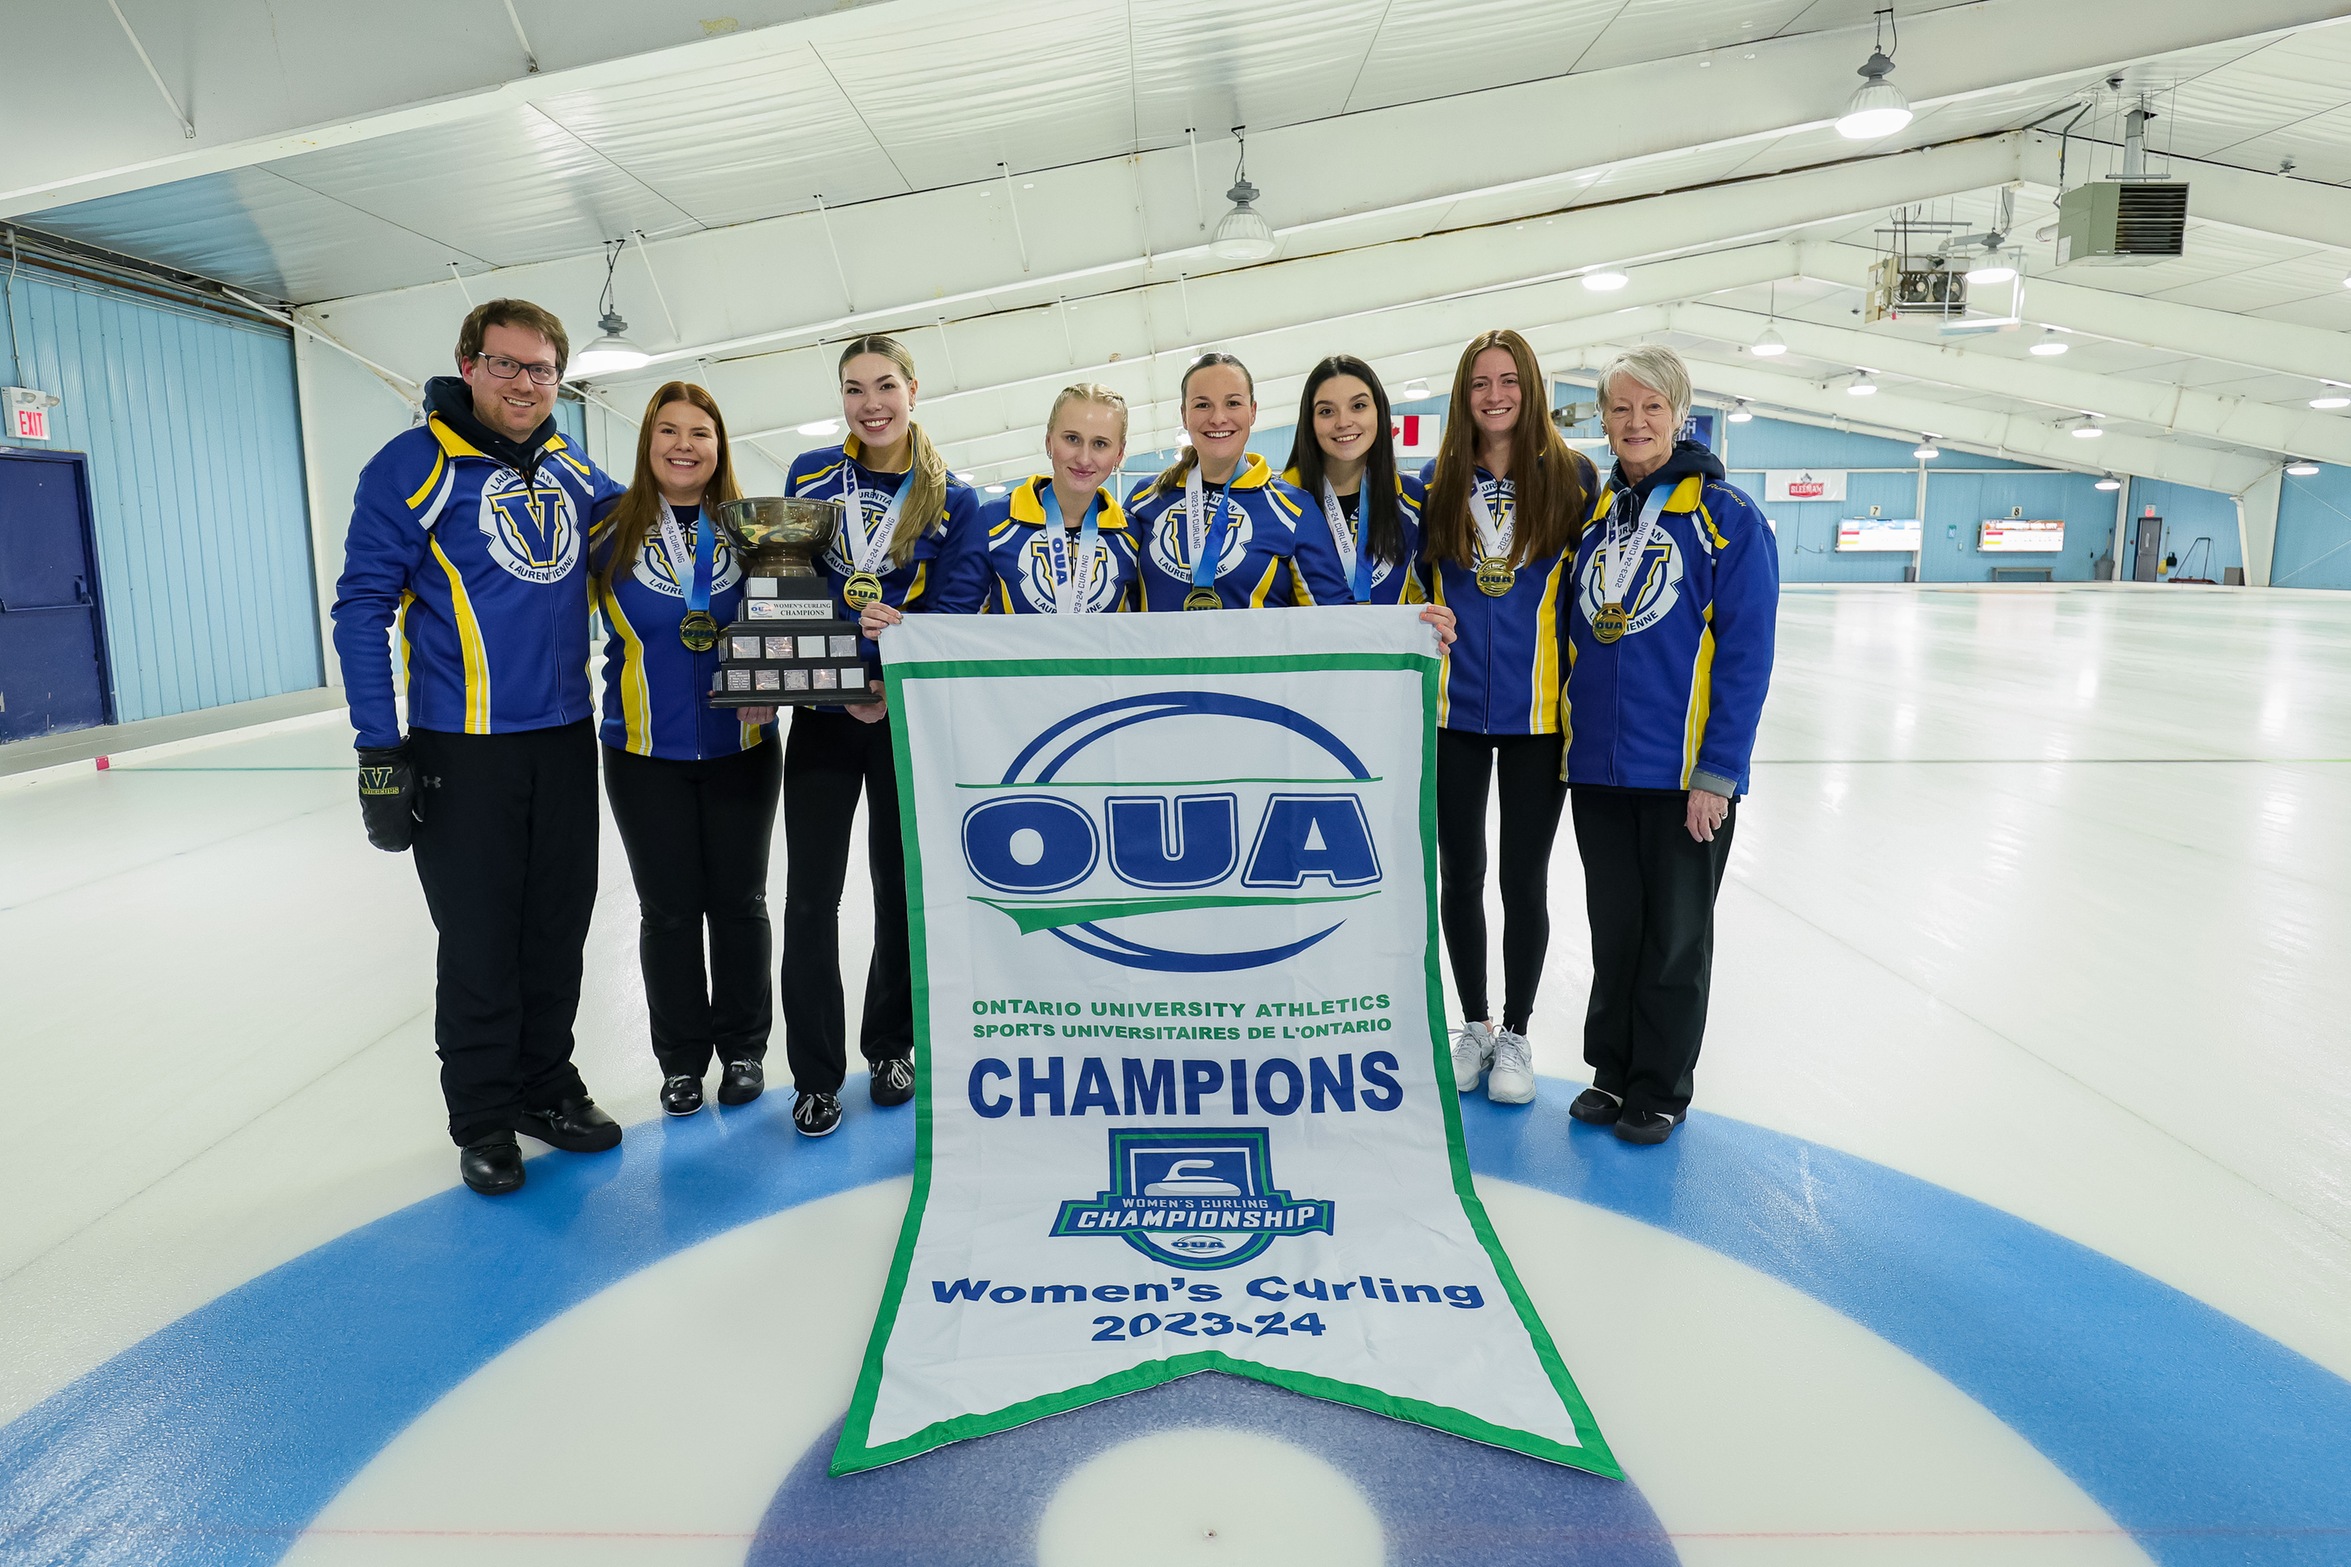 The 2023-2024 women's curling team after winning the OUA Championships - Laurel Jarvis